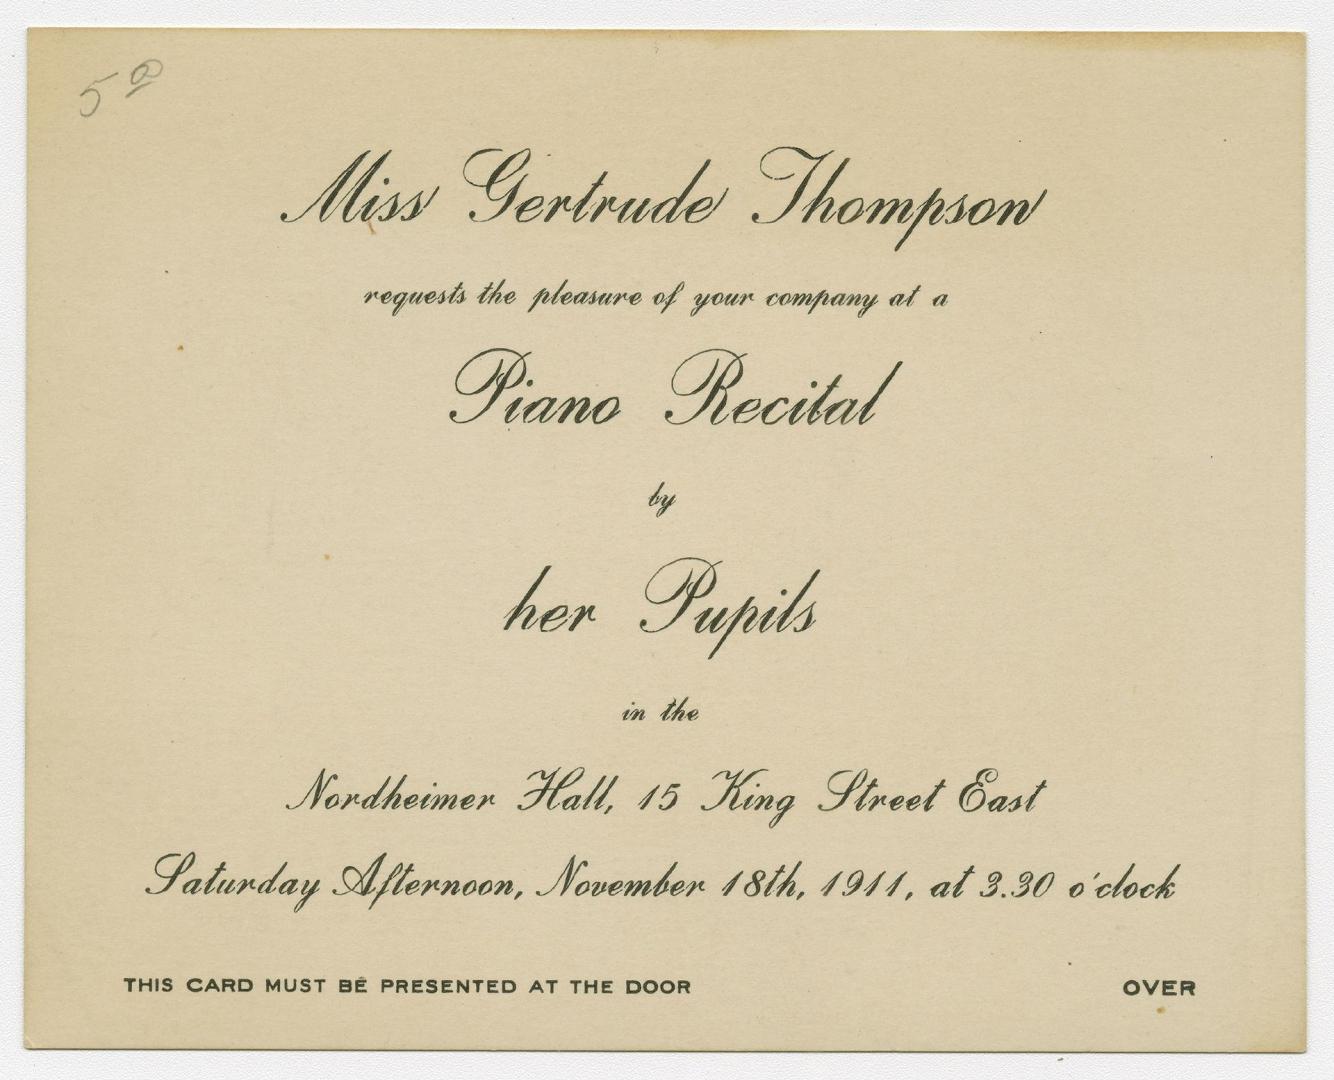 Miss Gertrude Thompson requests the pleasure of your company at a piano recital